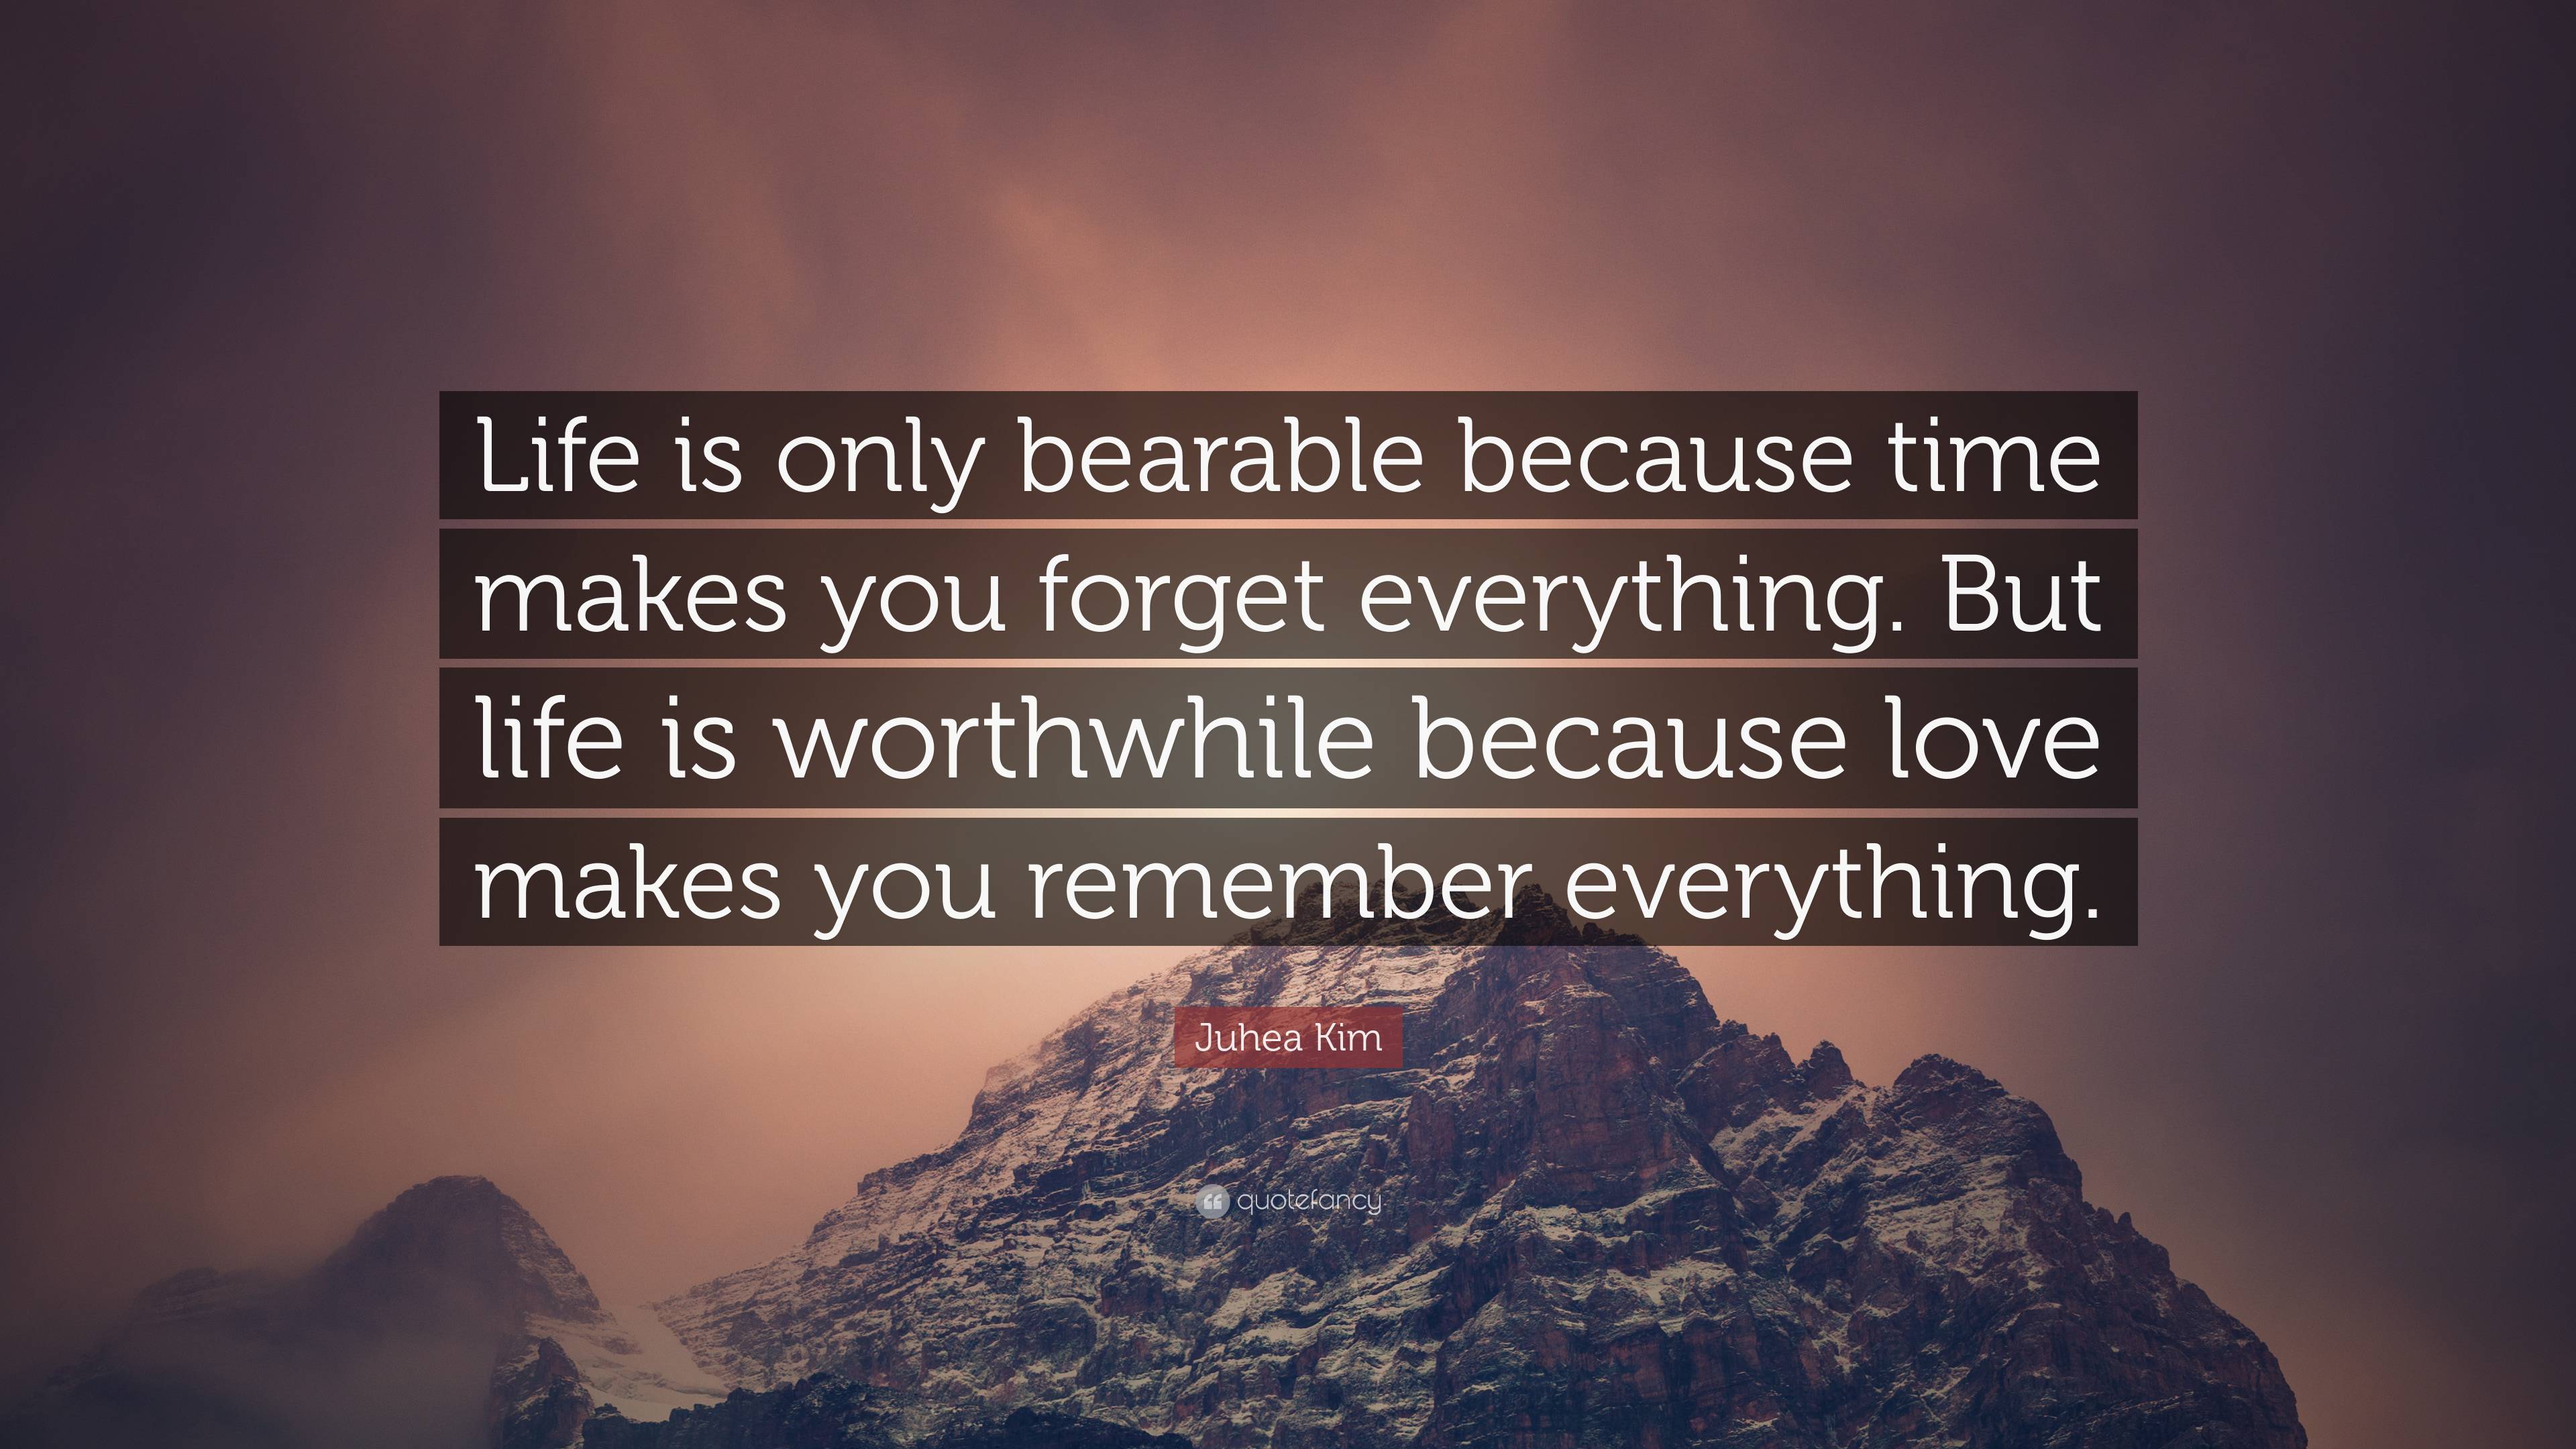 Juhea Kim Quote: “Life is only bearable because time makes you forget ...